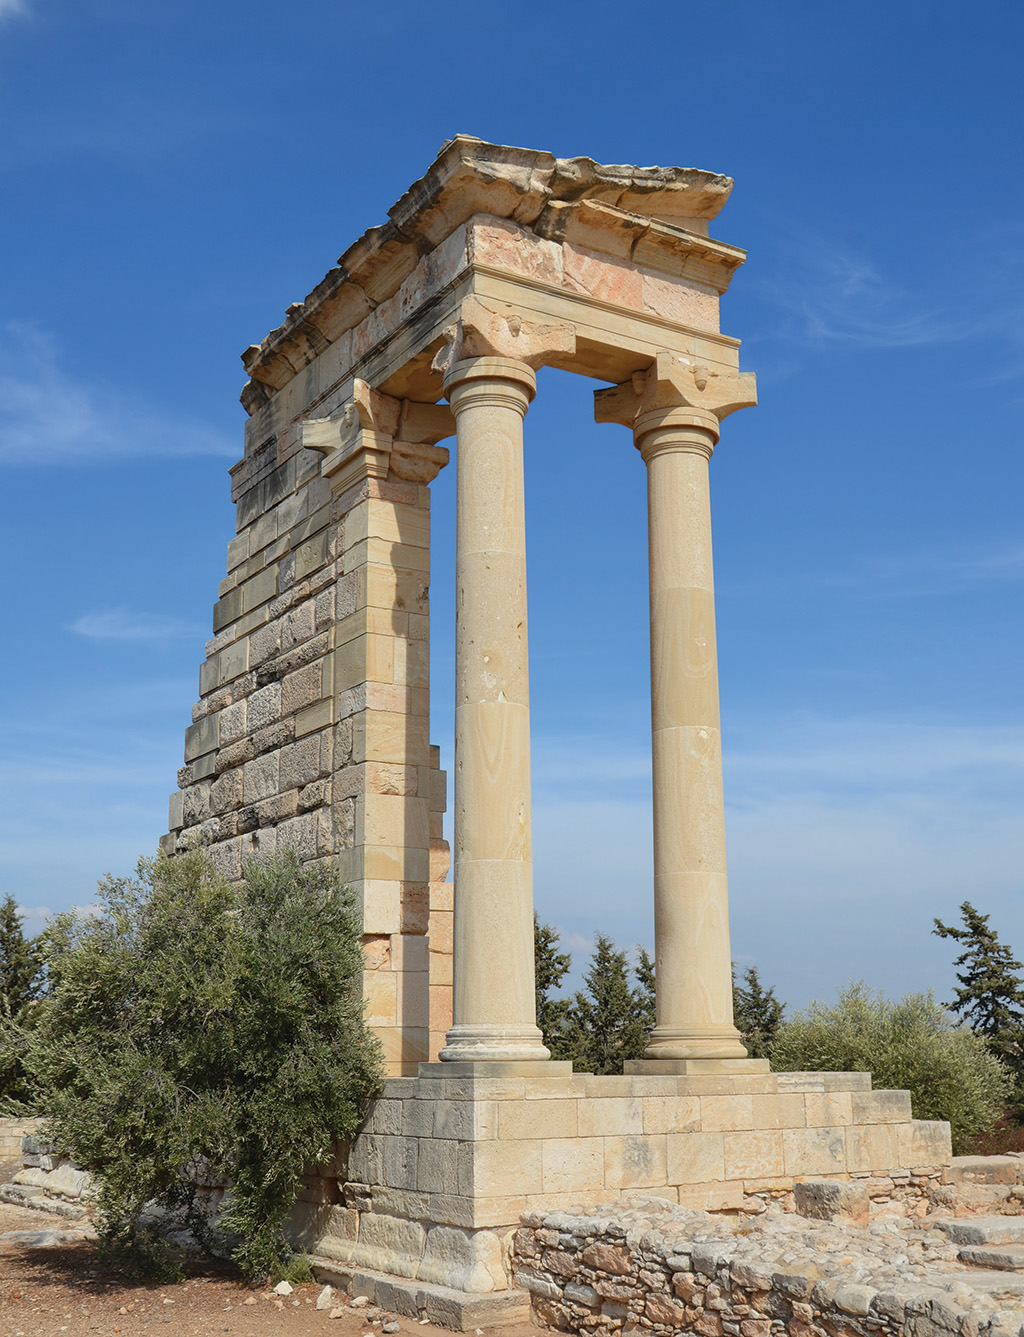 Temple at the Sanctuary of Apollo Hylates in Kourion, Cyprus.